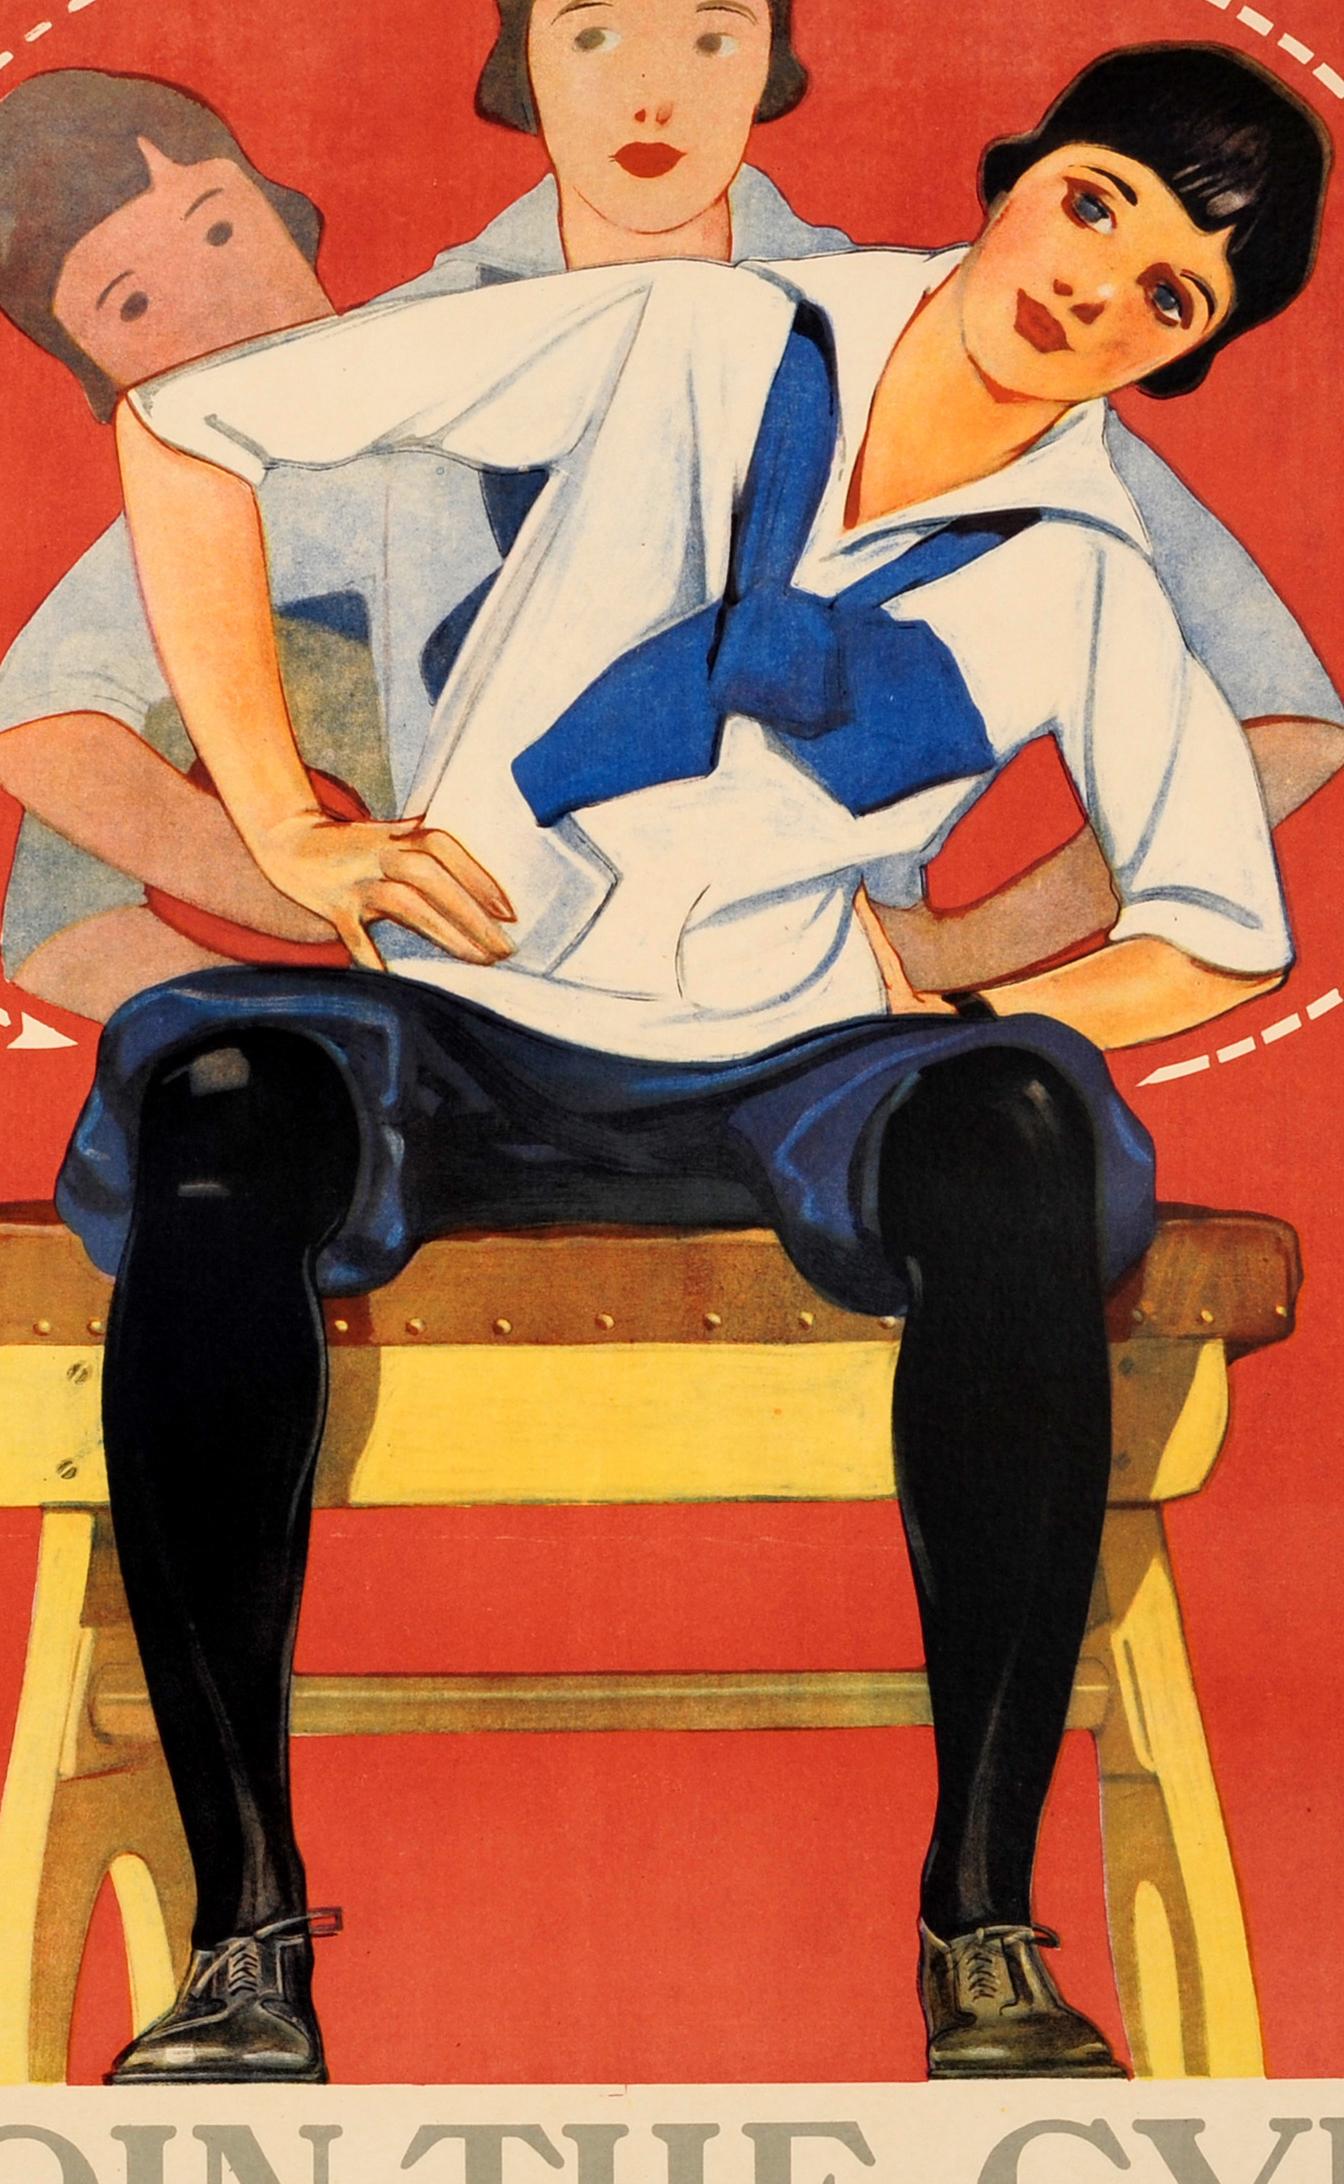 American Original Vintage Sport Poster Promoting Health and Fitness - Join The Gym - YWCA